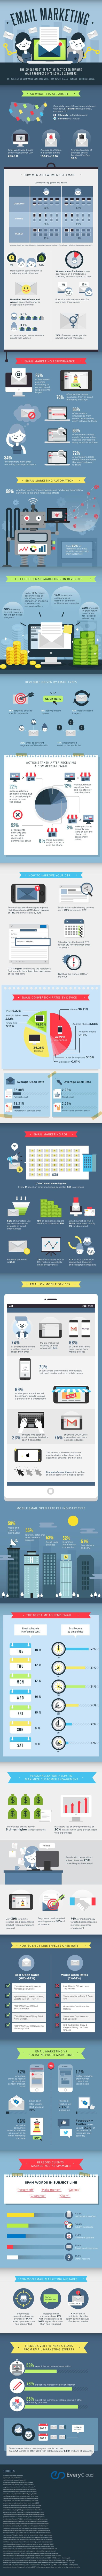 Email_Marketing_Stats_Infographic